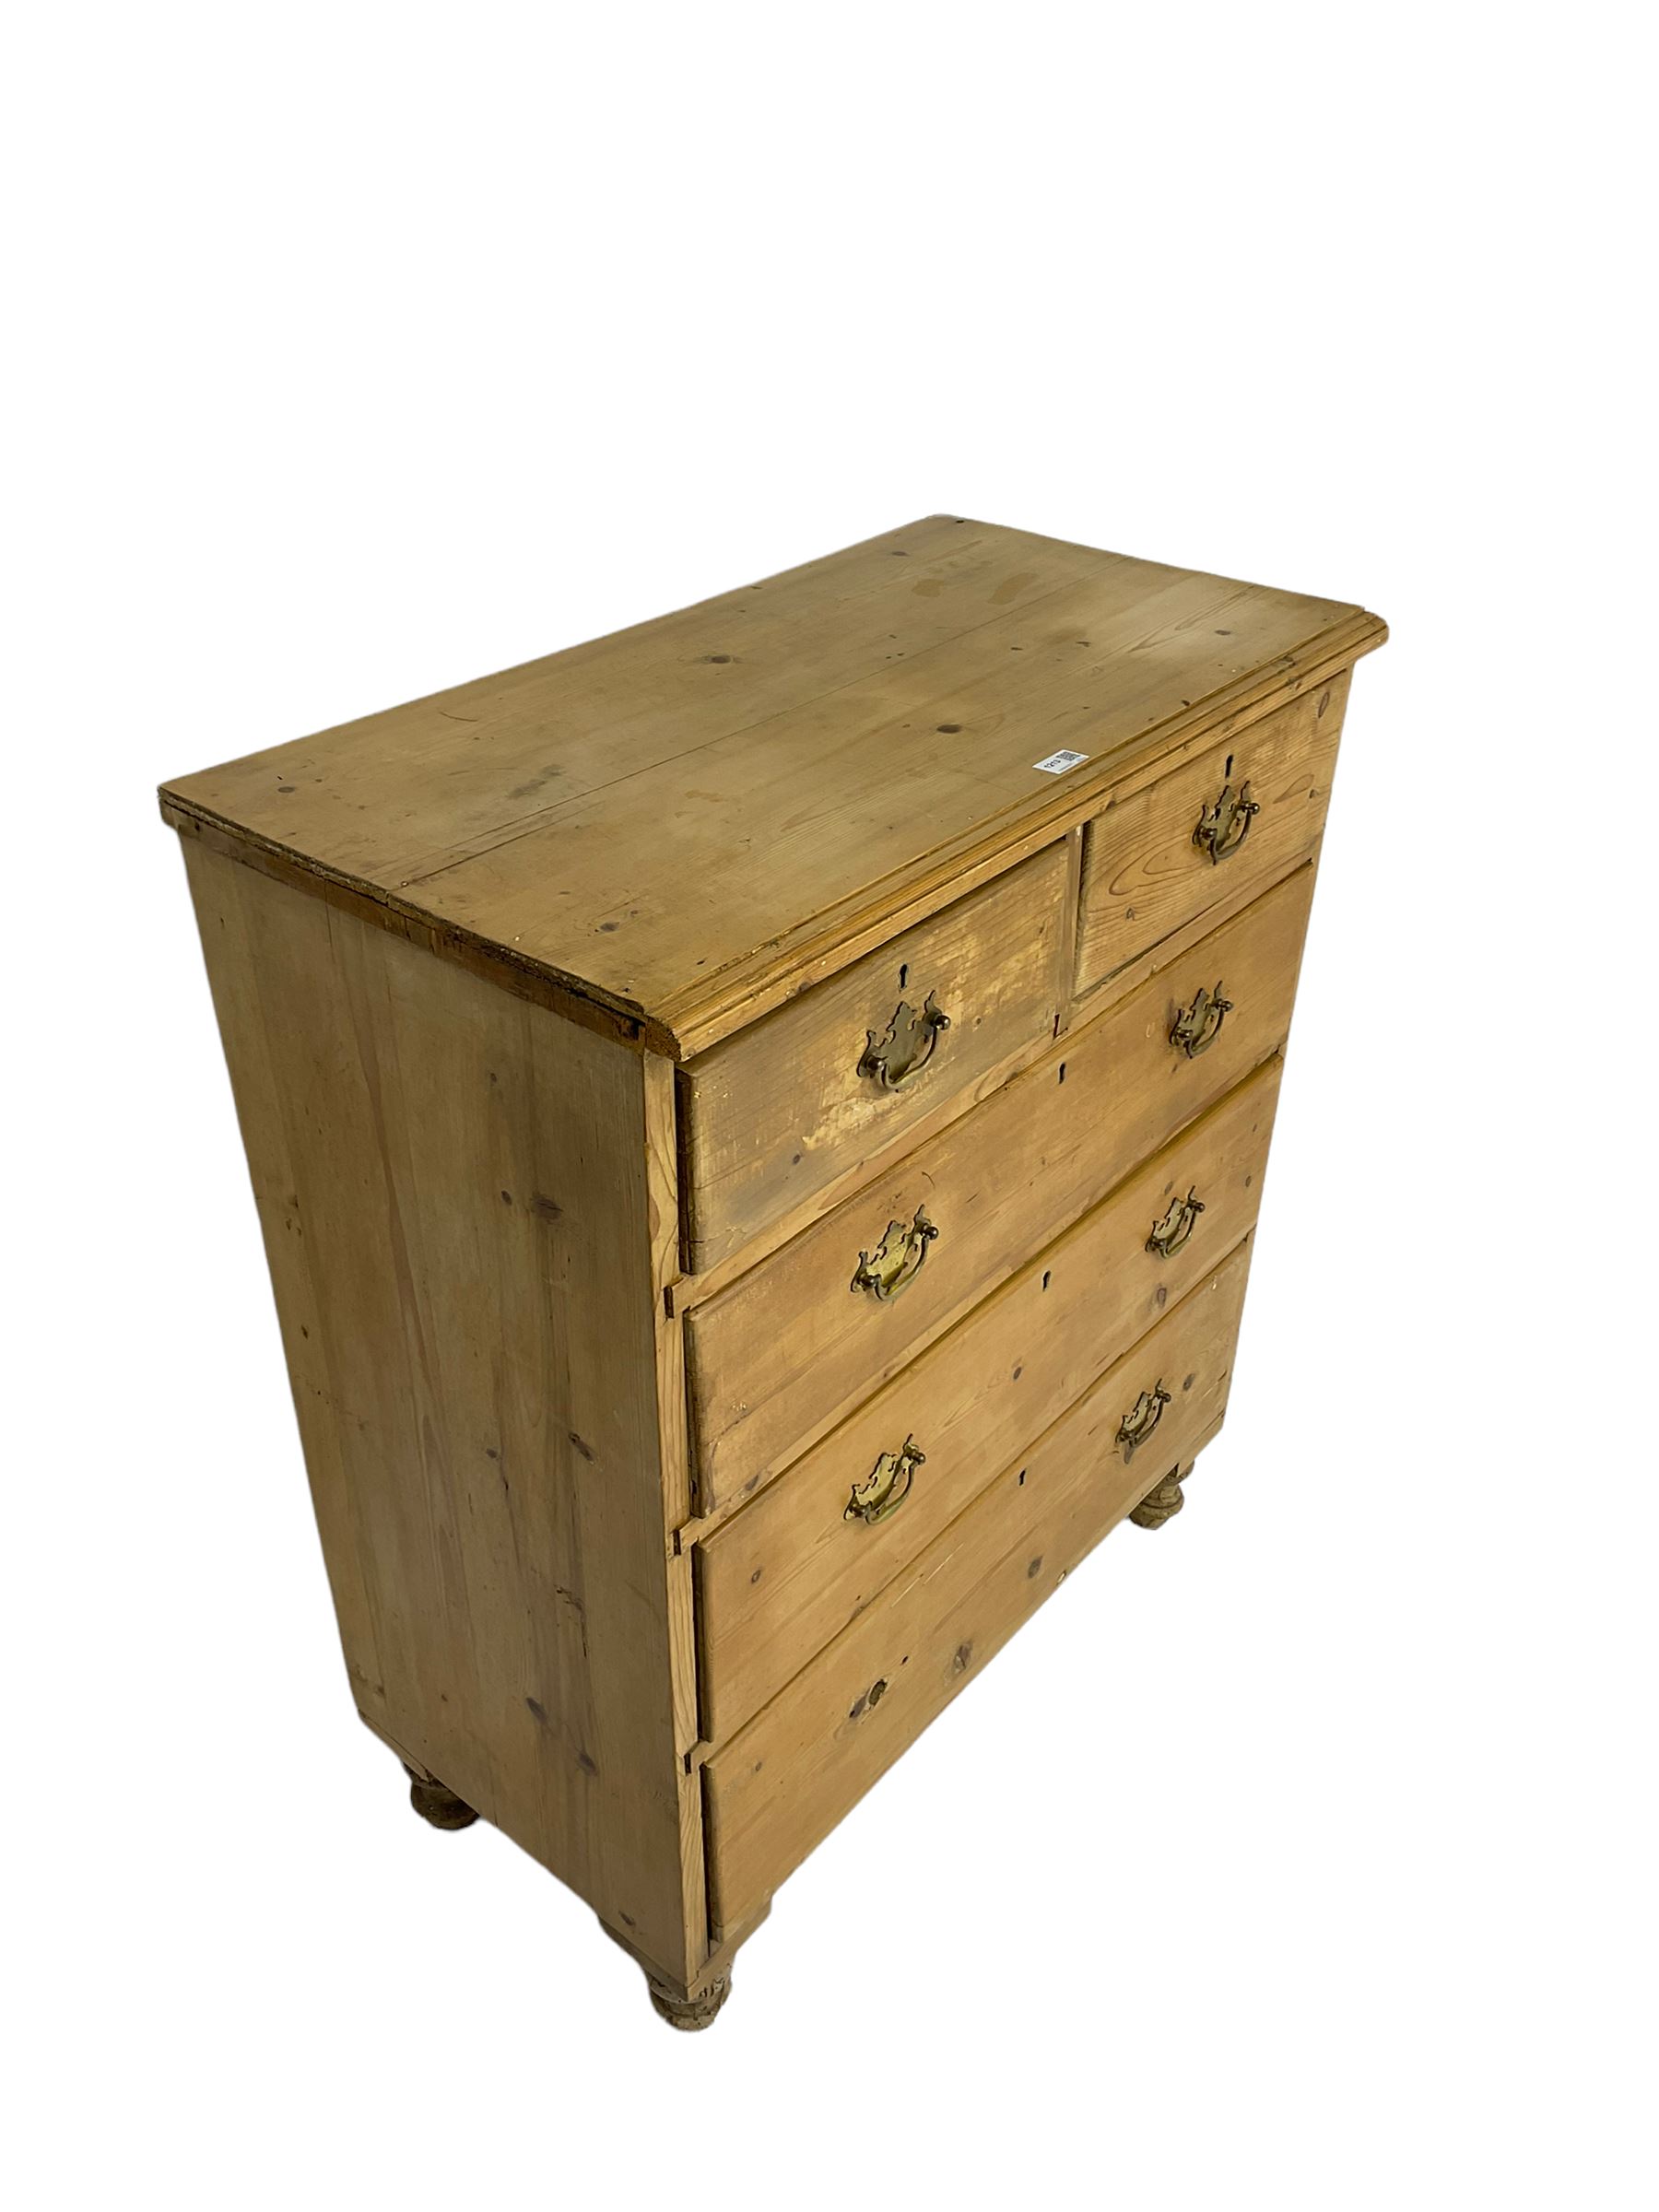 Victorian waxed pine chest - Image 5 of 7